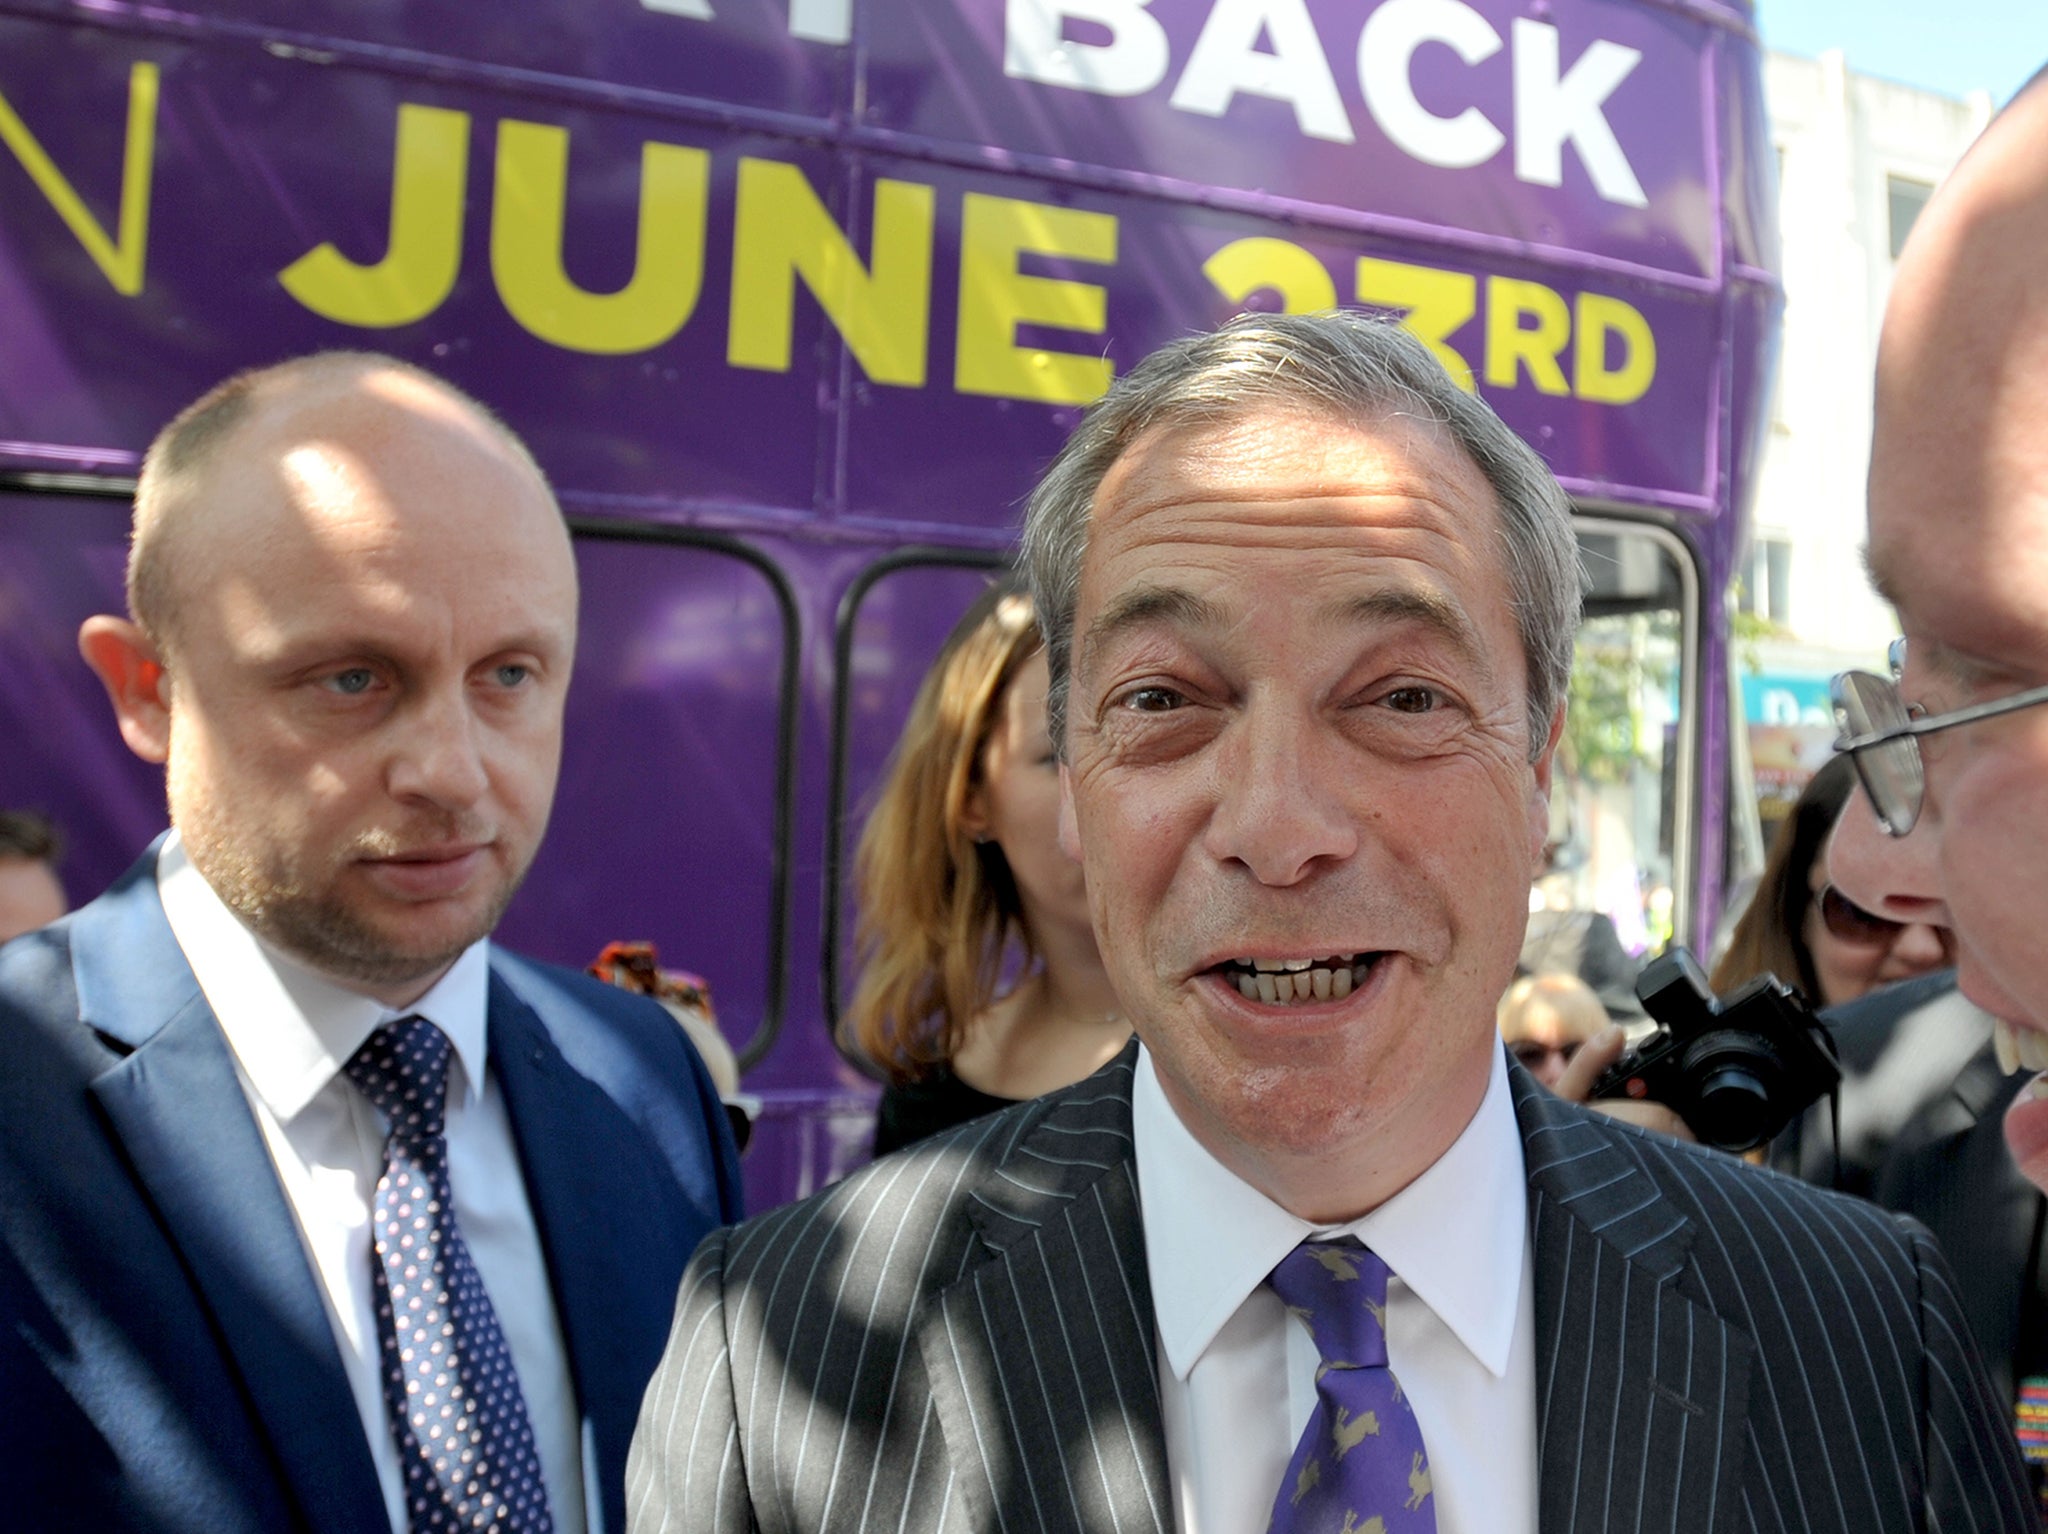 Nigel Farage campaigning in Clacton-on-Sea in Essex for Brexit before the EU referendum vote